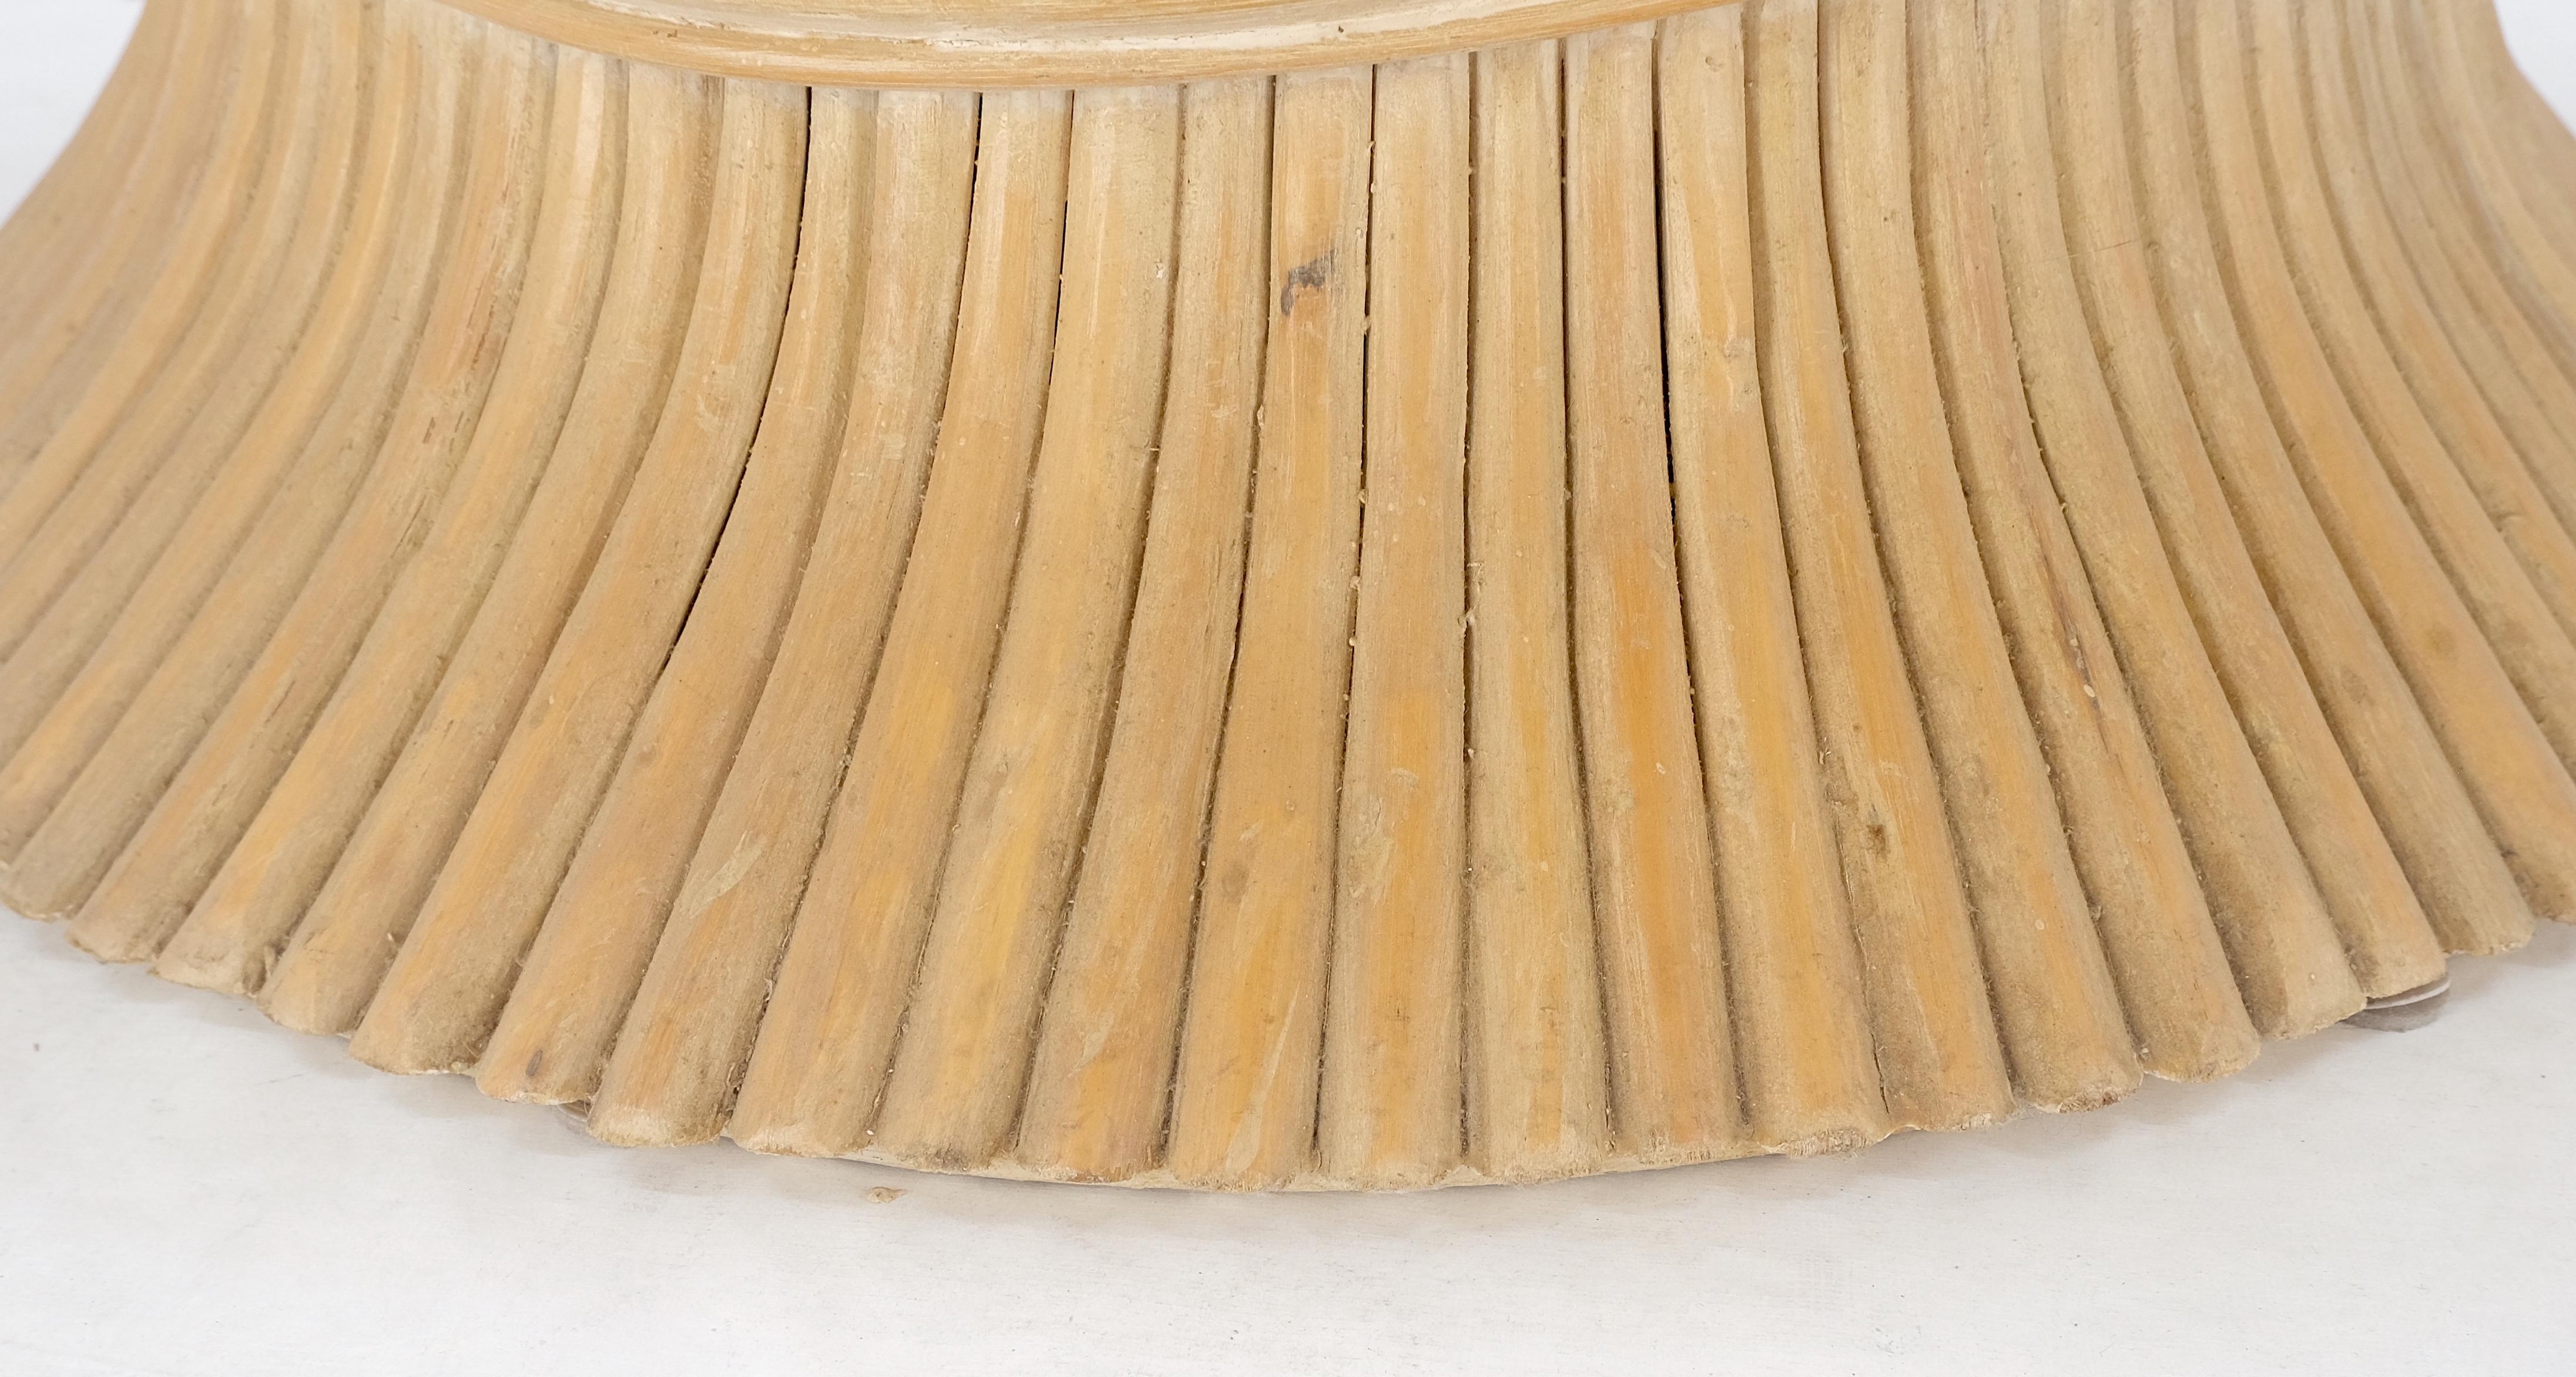 Large Round Sheath of Bamboo Round Coffee Table Mid Century Modern McGuire MINT! For Sale 1